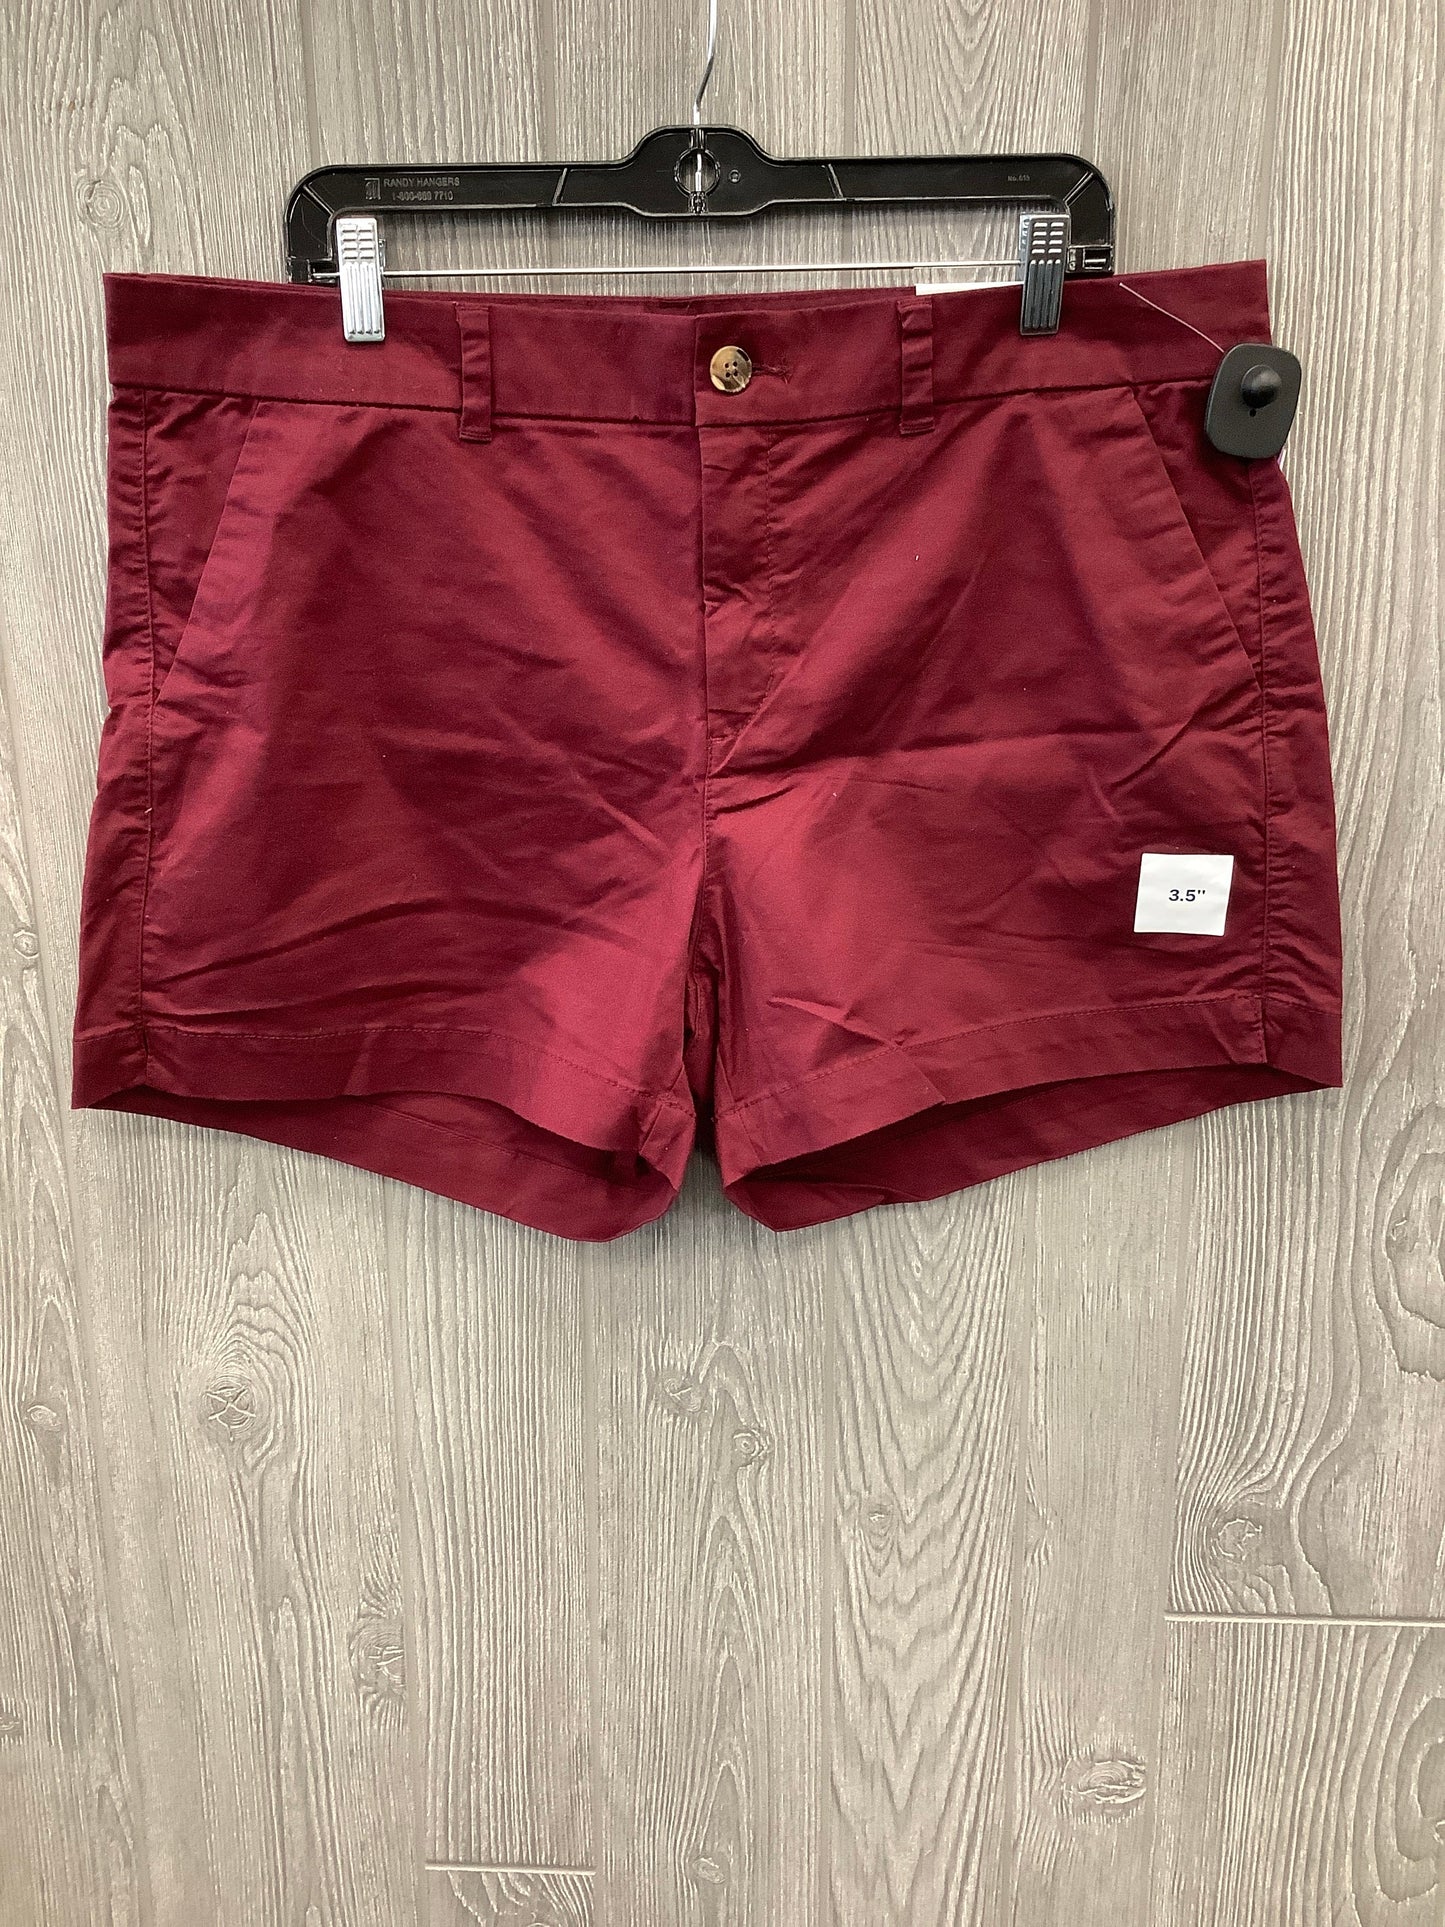 Red Shorts Old Navy, Size 16